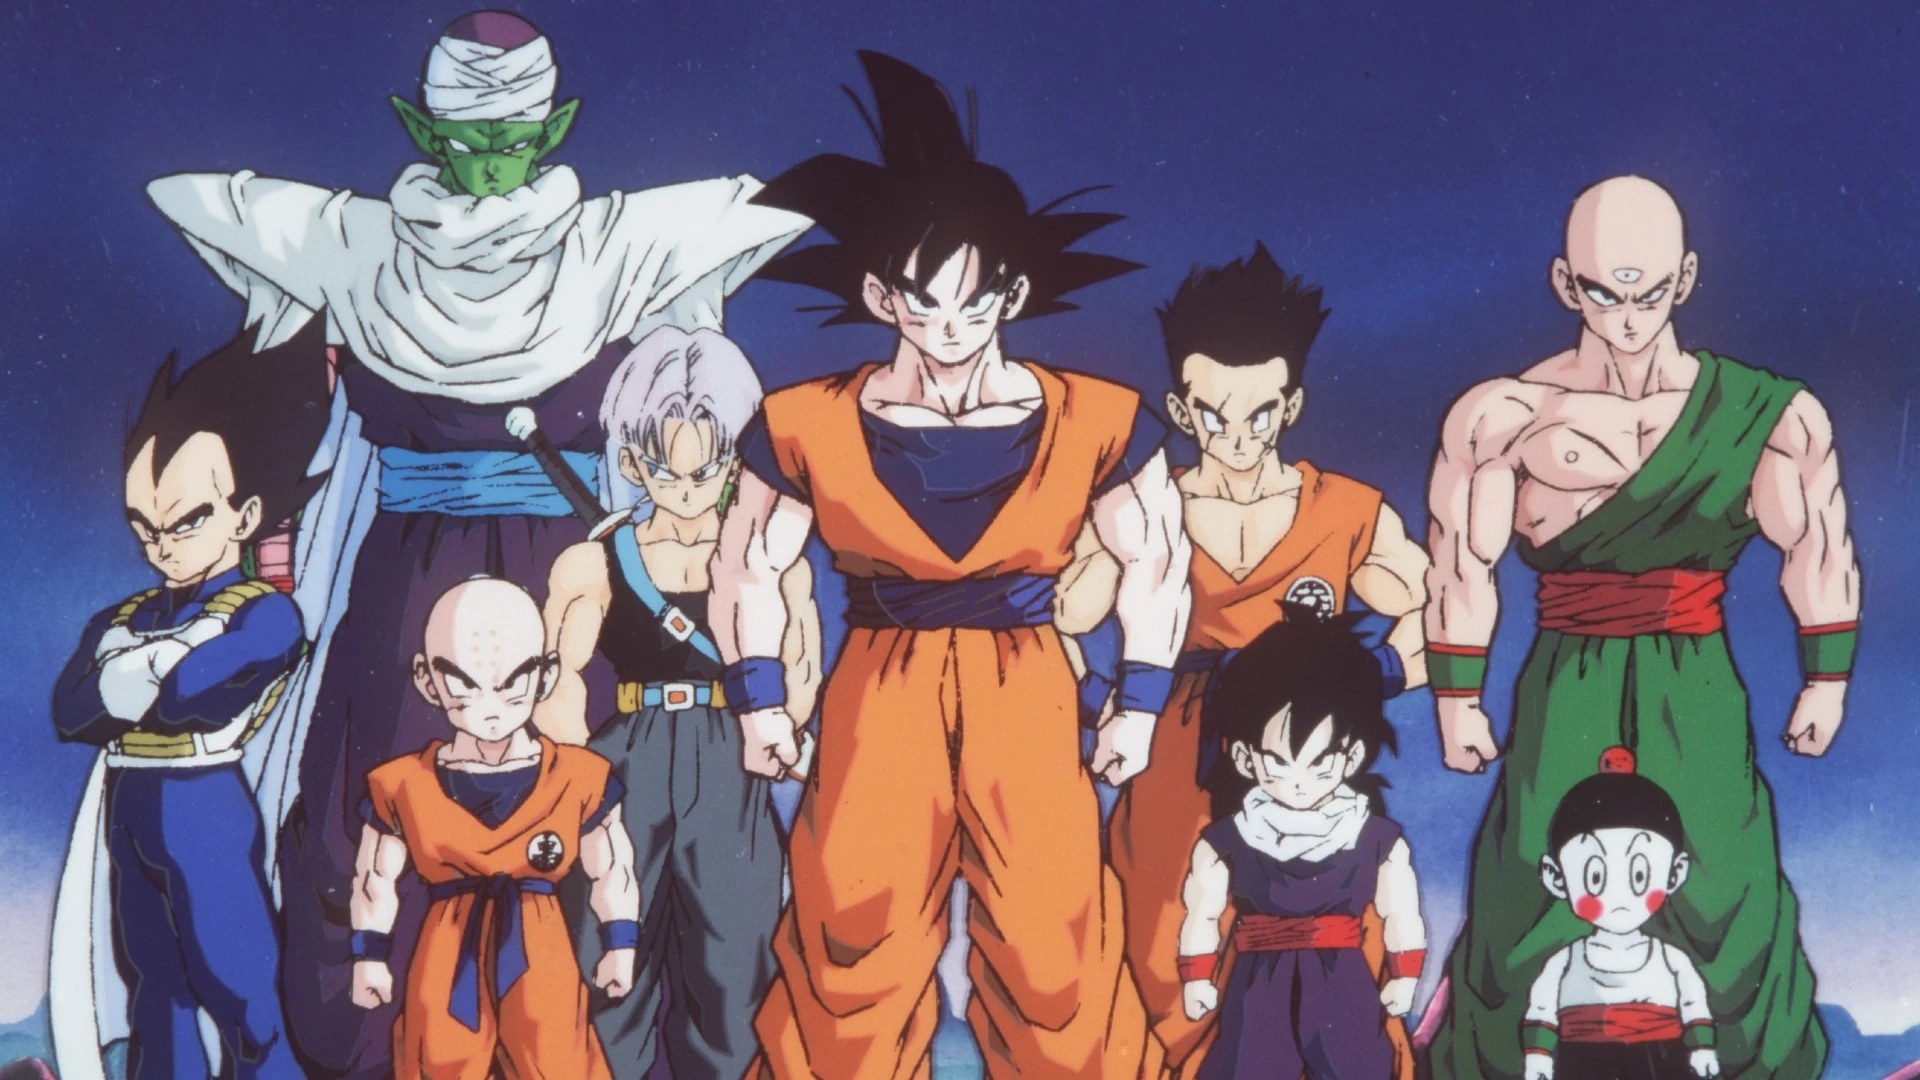 Why hasn't Legends released any characters from Super Dragon Ball